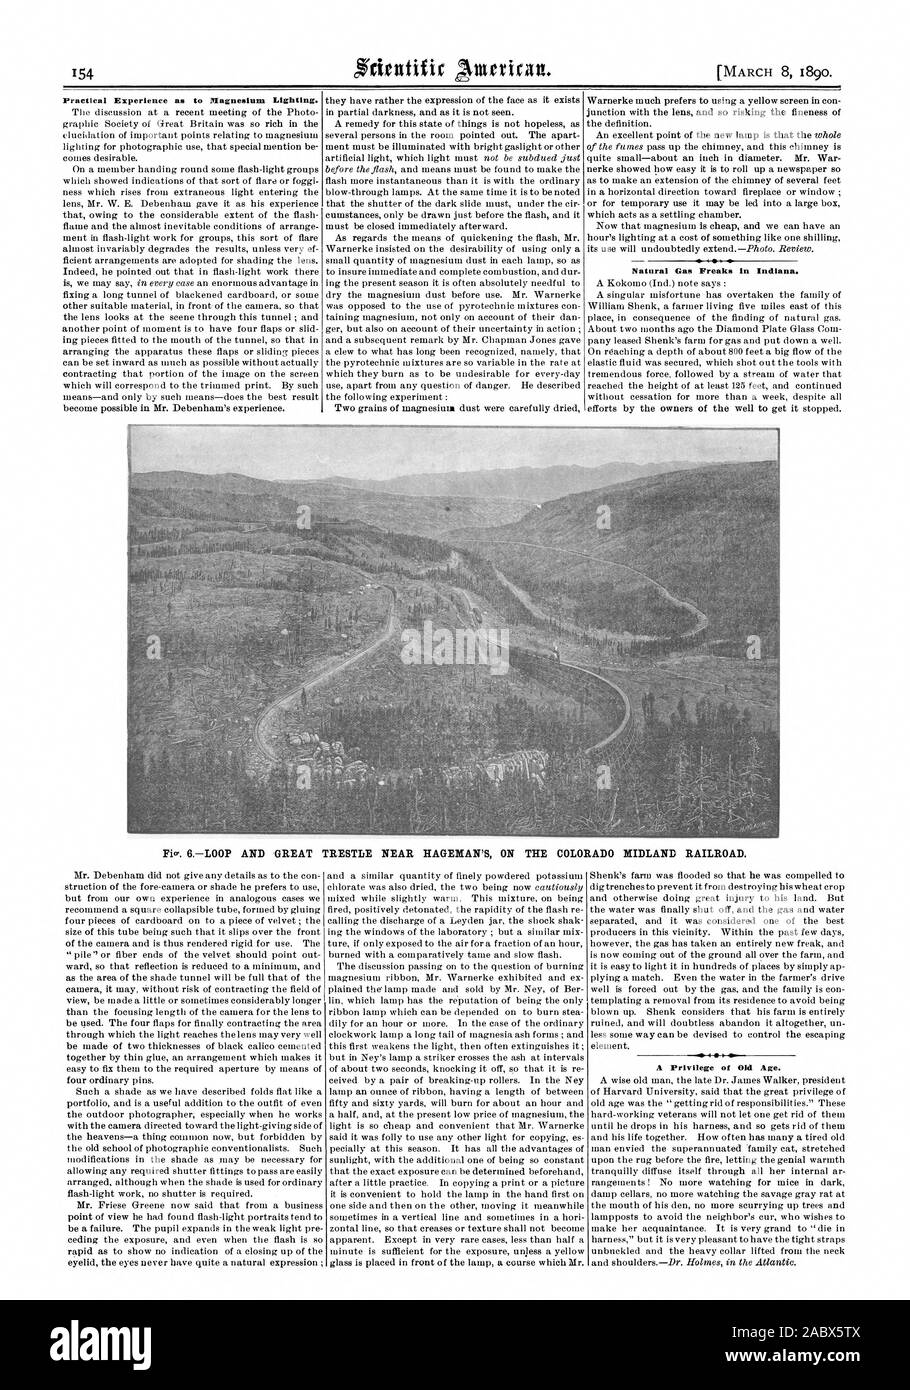 Practical Experience as to Inagnesium Lighting. Natural Gas Freaks in Indiana. 6LOOP AND GREAT TRESTLE NEAR HAGEMAN'S ON THE COLORADO MIDLAND RAILROAD. A Privilege of Old Age., scientific american, 1890-03-08 Stock Photo